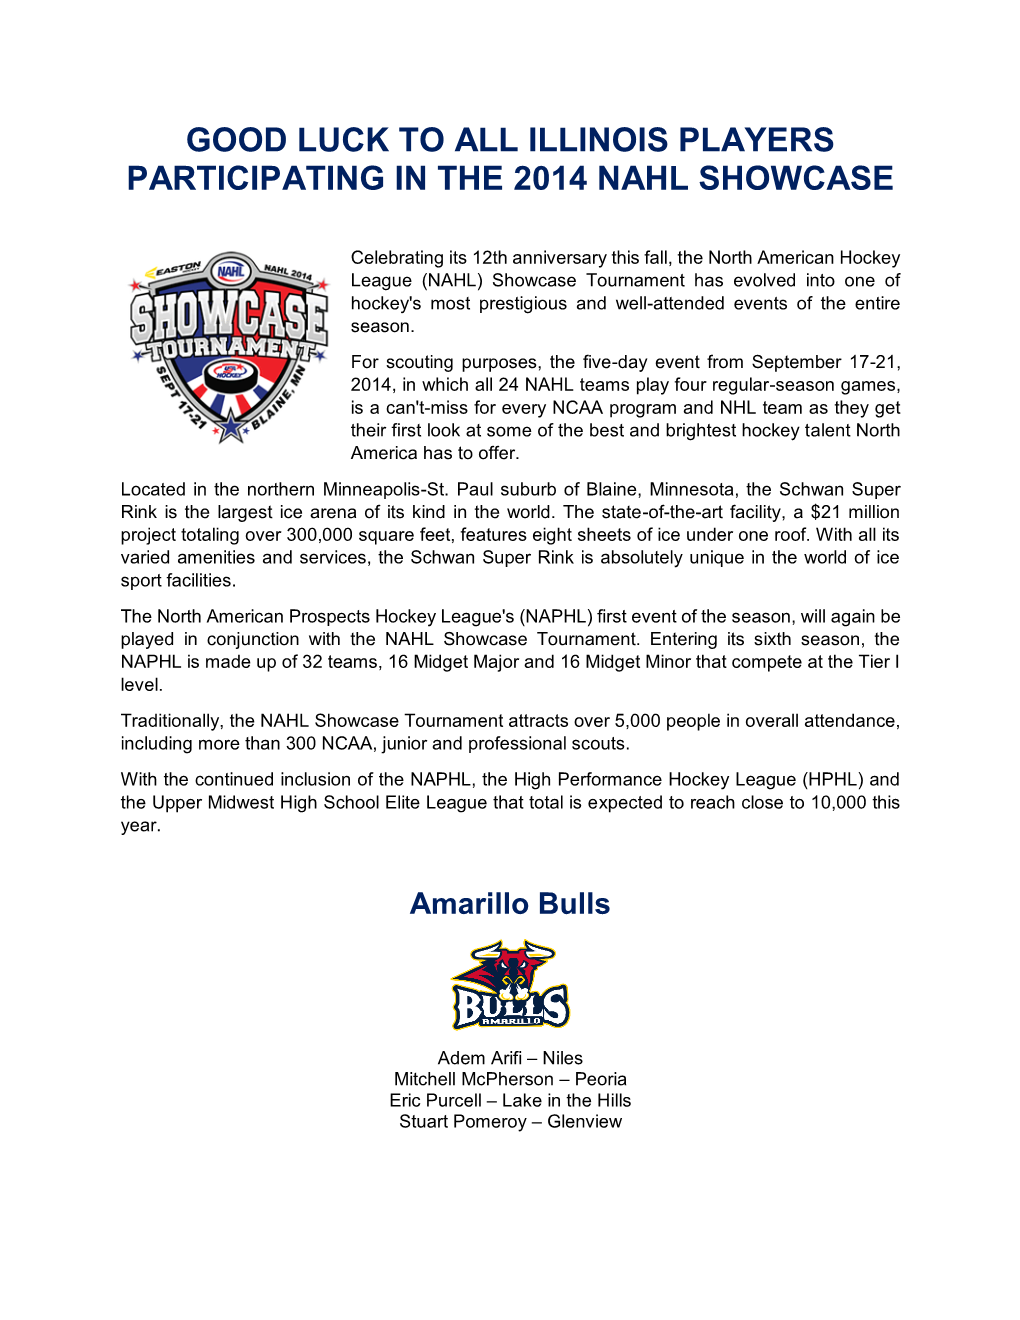 Good Luck to All Illinois Players Participating in the 2014 Nahl Showcase